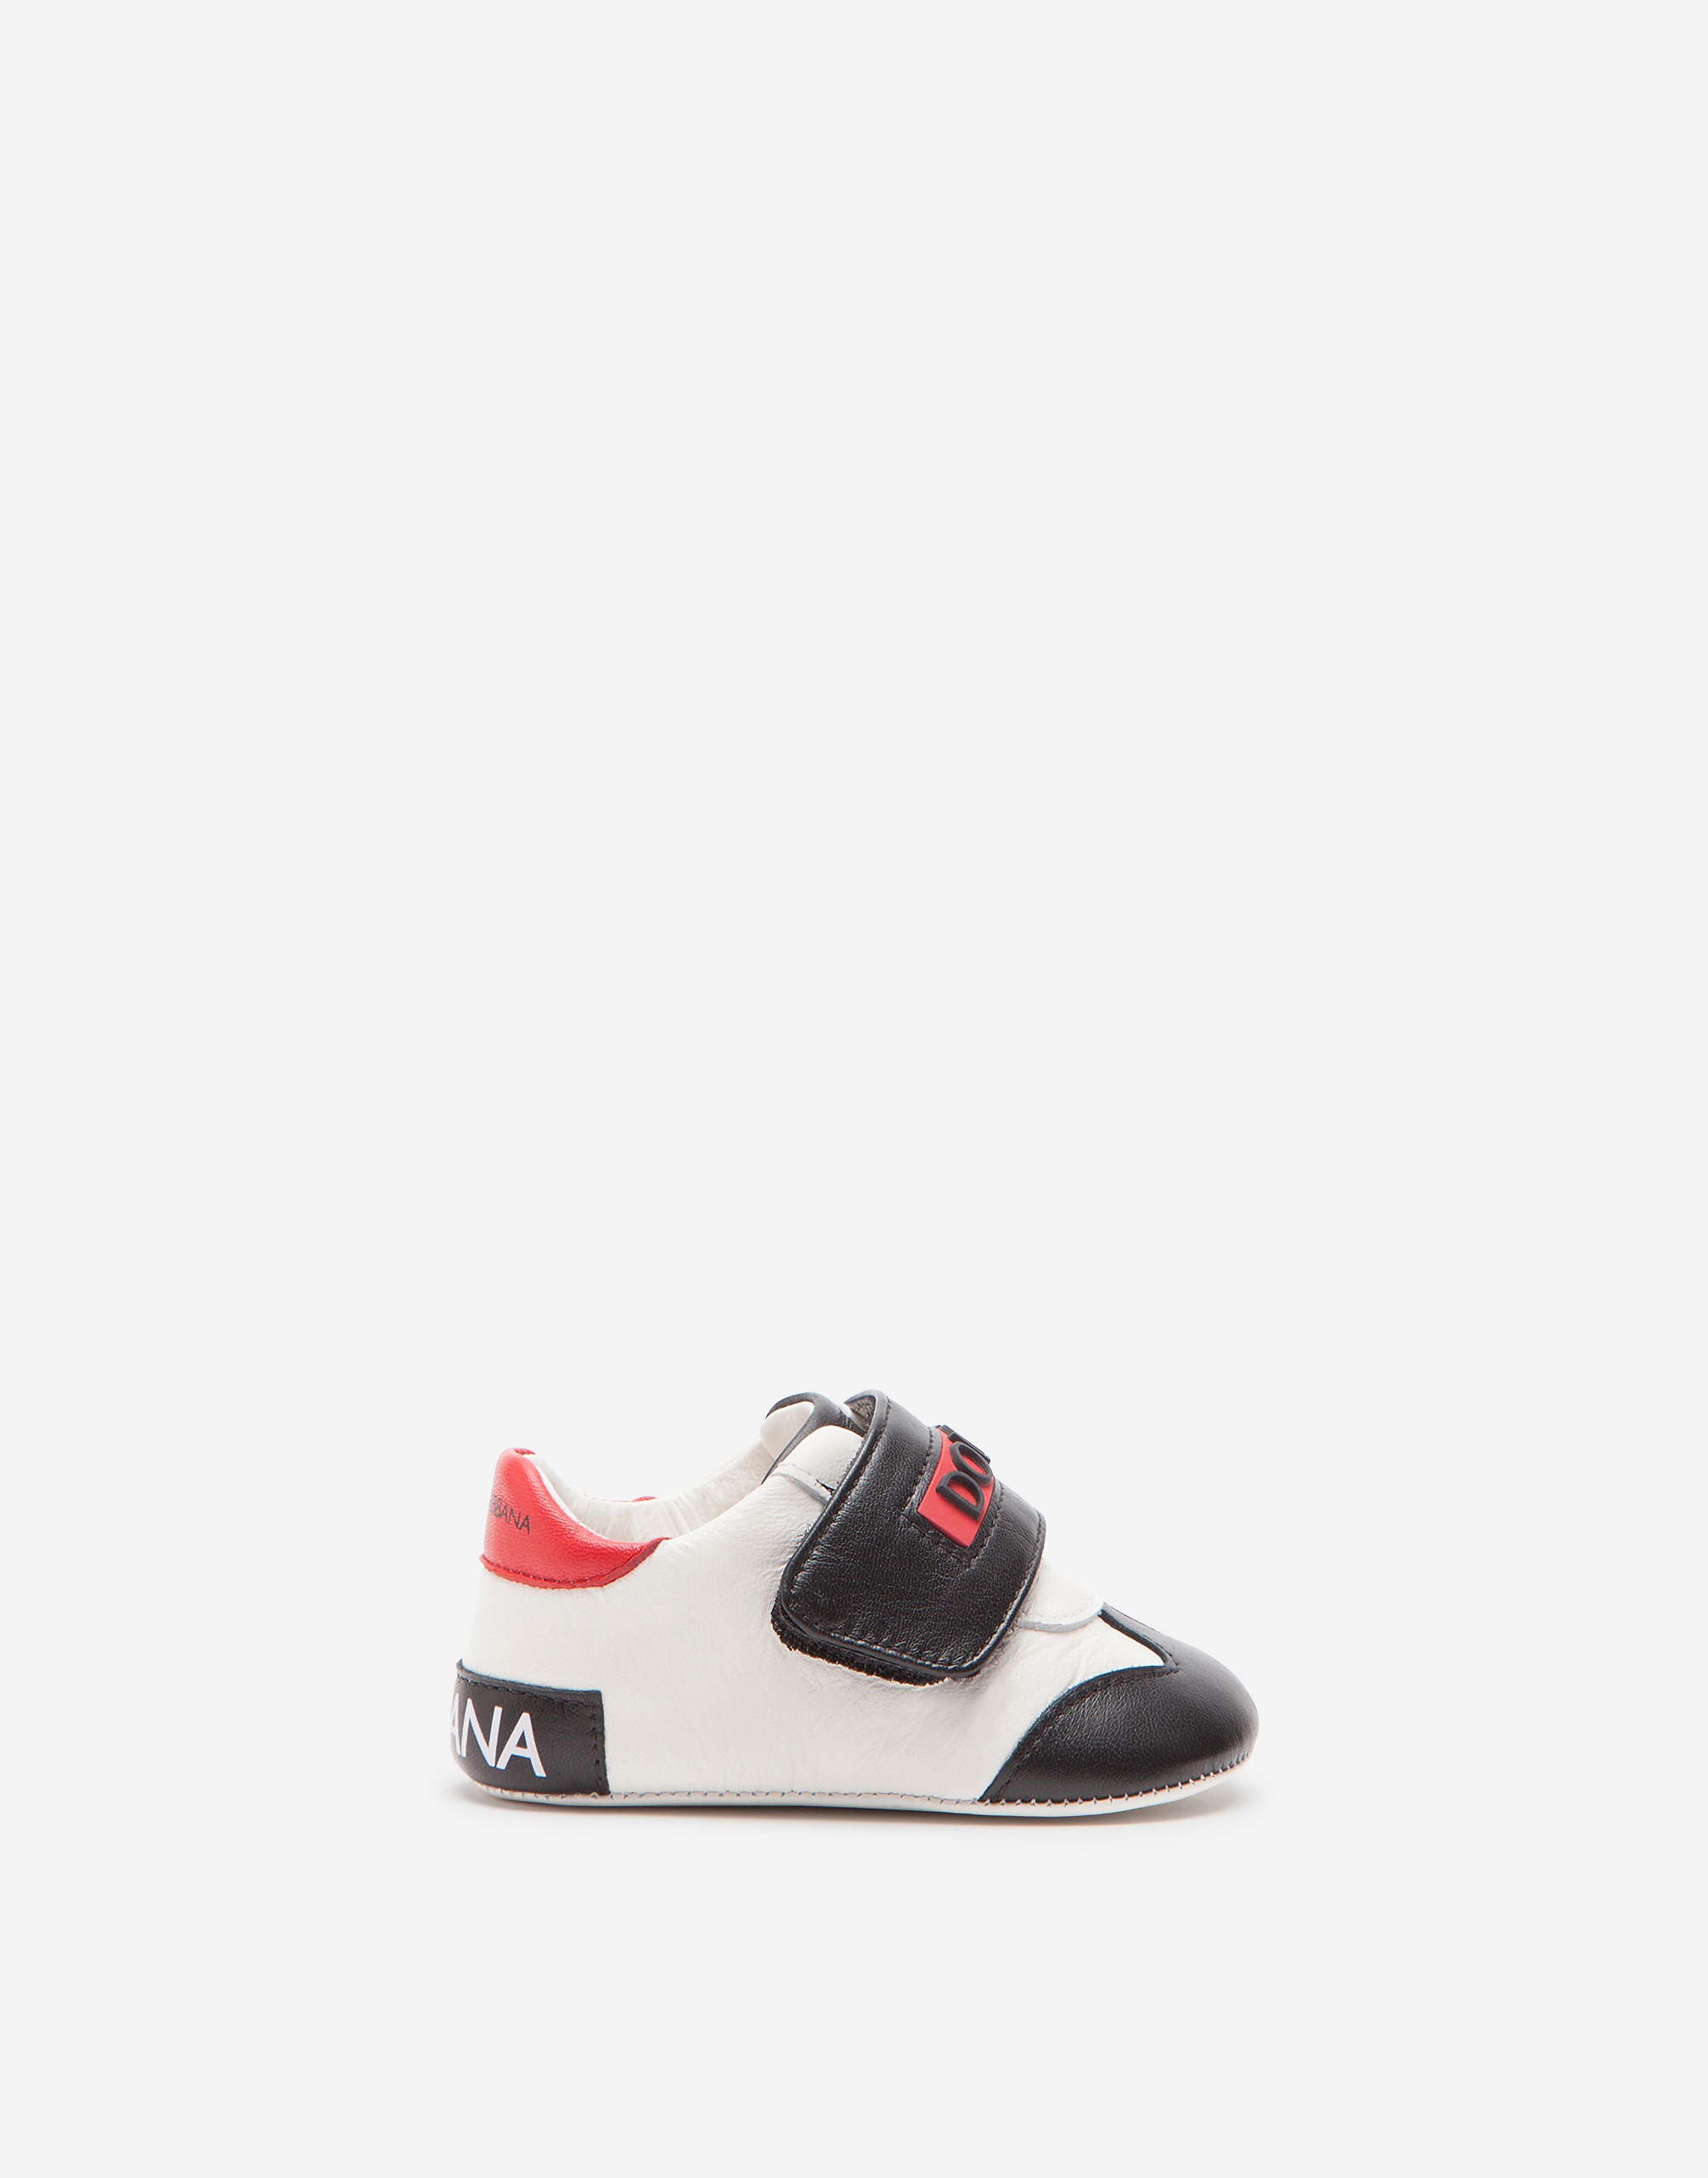 DOLCE & GABBANA TWO-TONE LAMBSKIN SNEAKERS WITH LOGO AND HOOK-AND-LOOP FASTENER